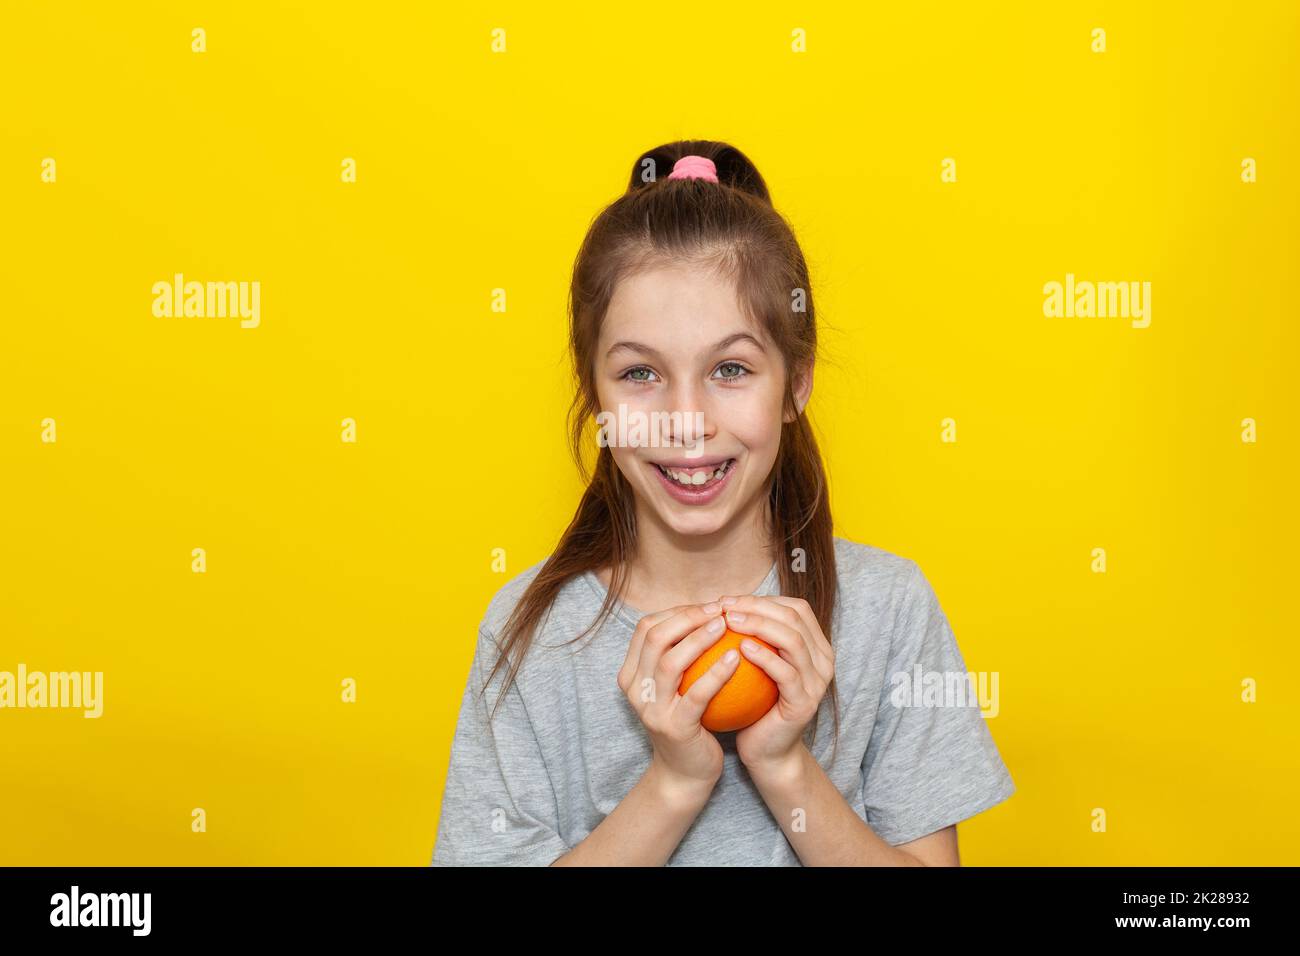 Little smiling cute girl in gray t-shirt holding fresh an orange over yellow background. Healthy lifestyle and clean eating concept Stock Photo